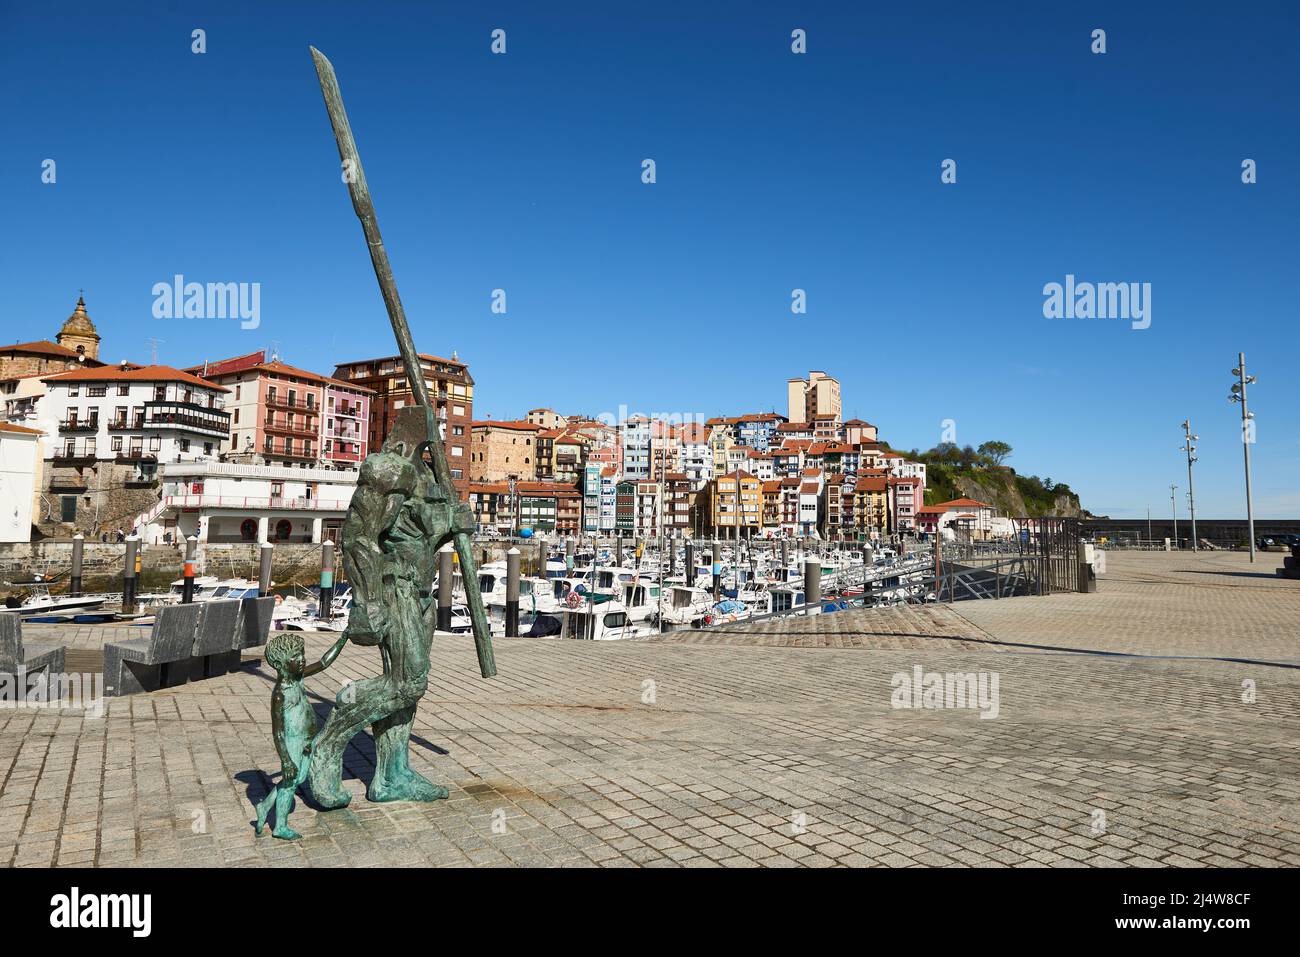 Monument to the fisherman and his son in the fishing village of Bermeo, Vizcaya province, Basque Country, Euskadi, Spain, Europe Stock Photo